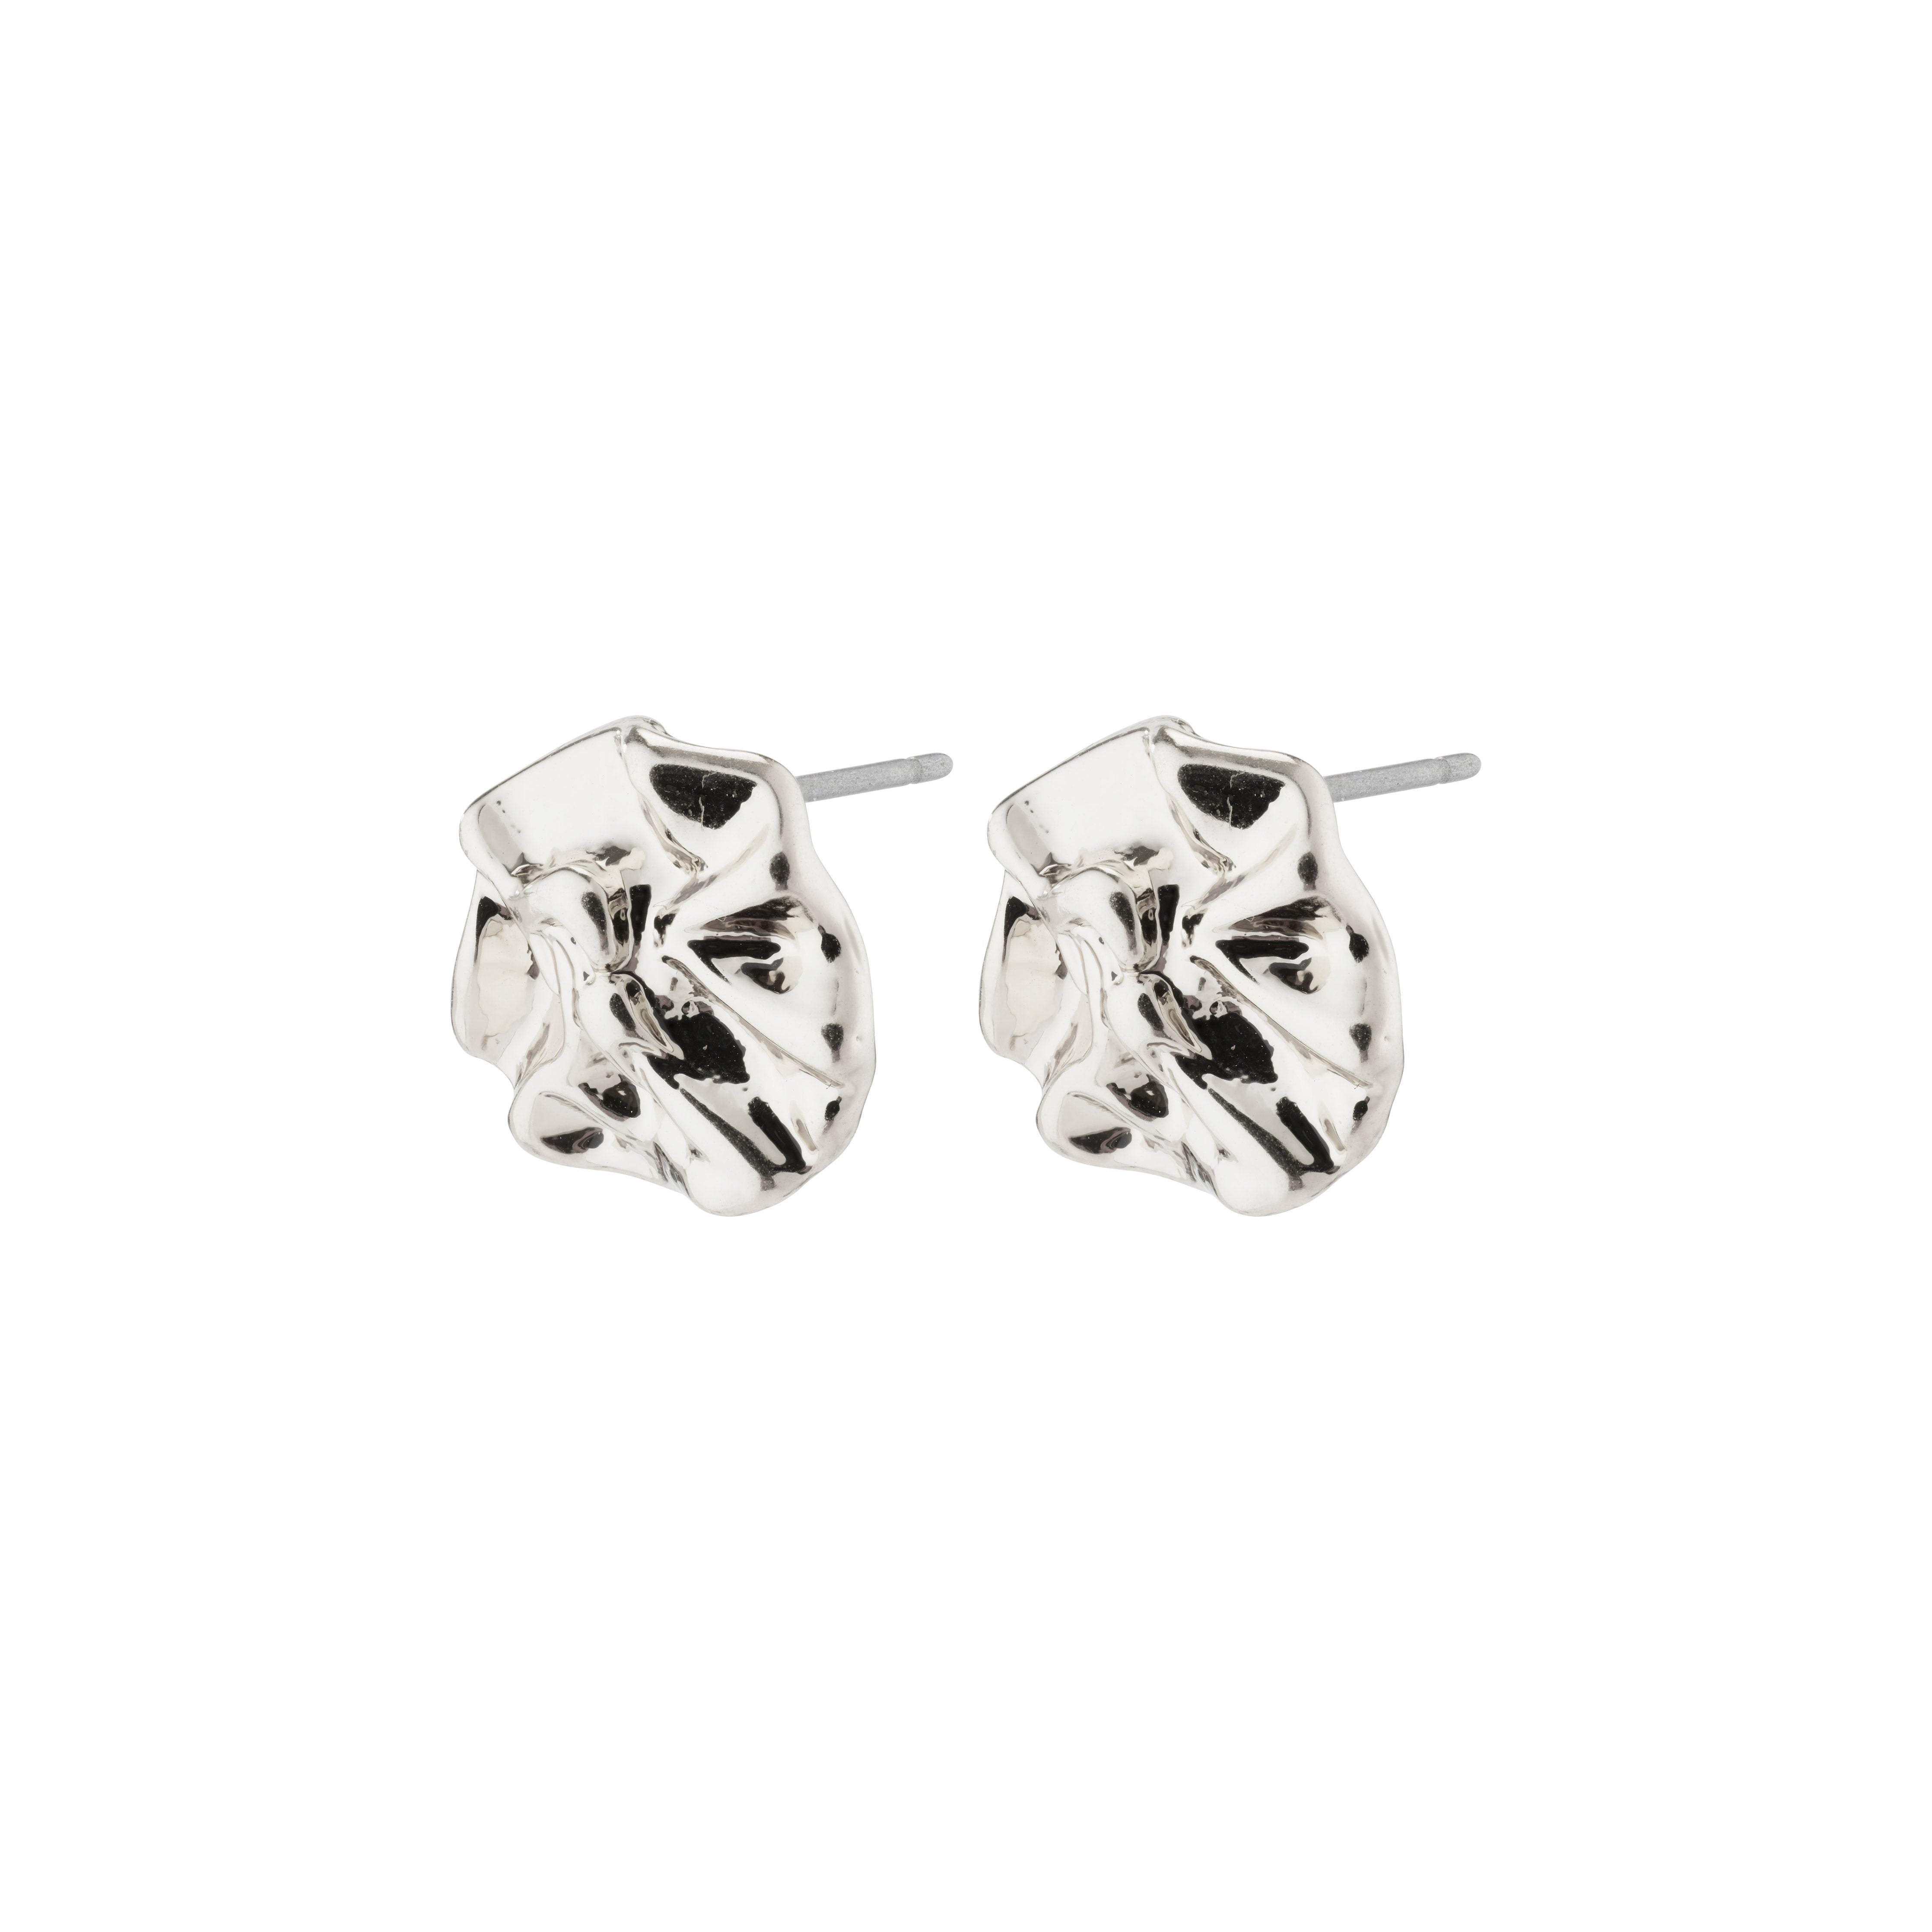 WILLPOWER recycled earrings silver-plated